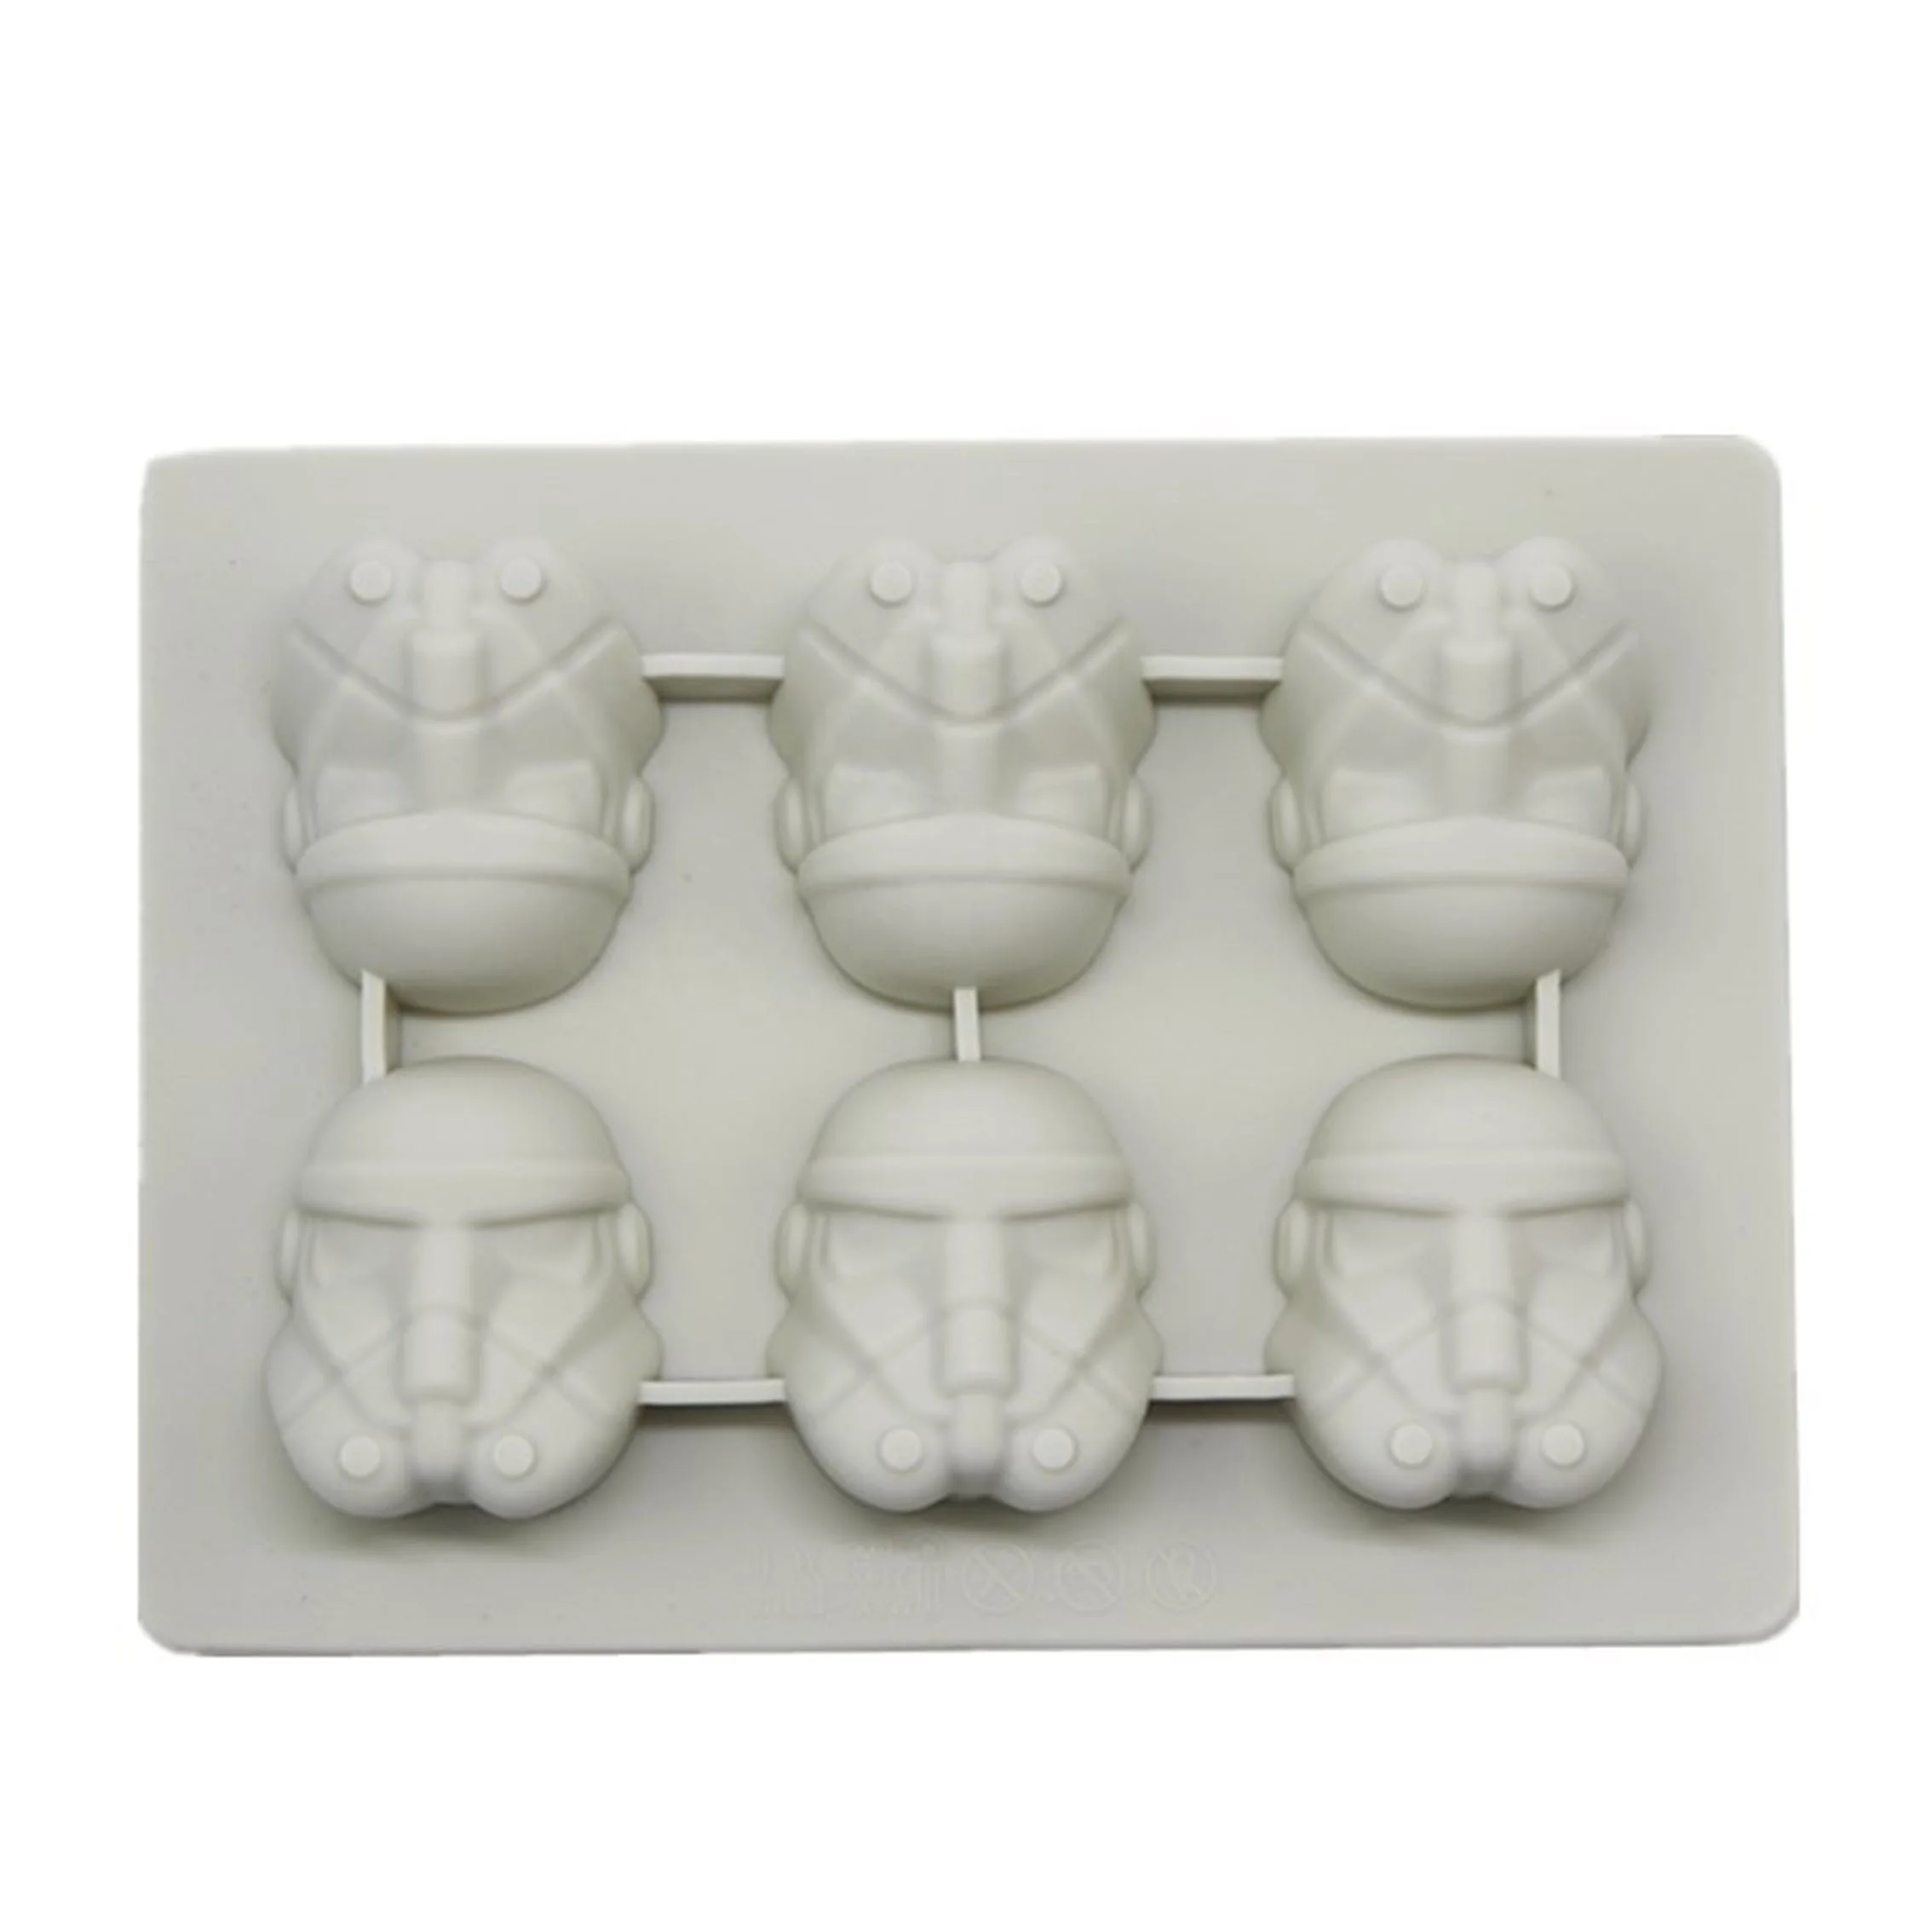 2023 Hot Sale High Quality Silicone Ice Cubes Mold DIY Chocolate Soap Mold Tray Resin Number Shape Kitchen Baking Cake Moulding